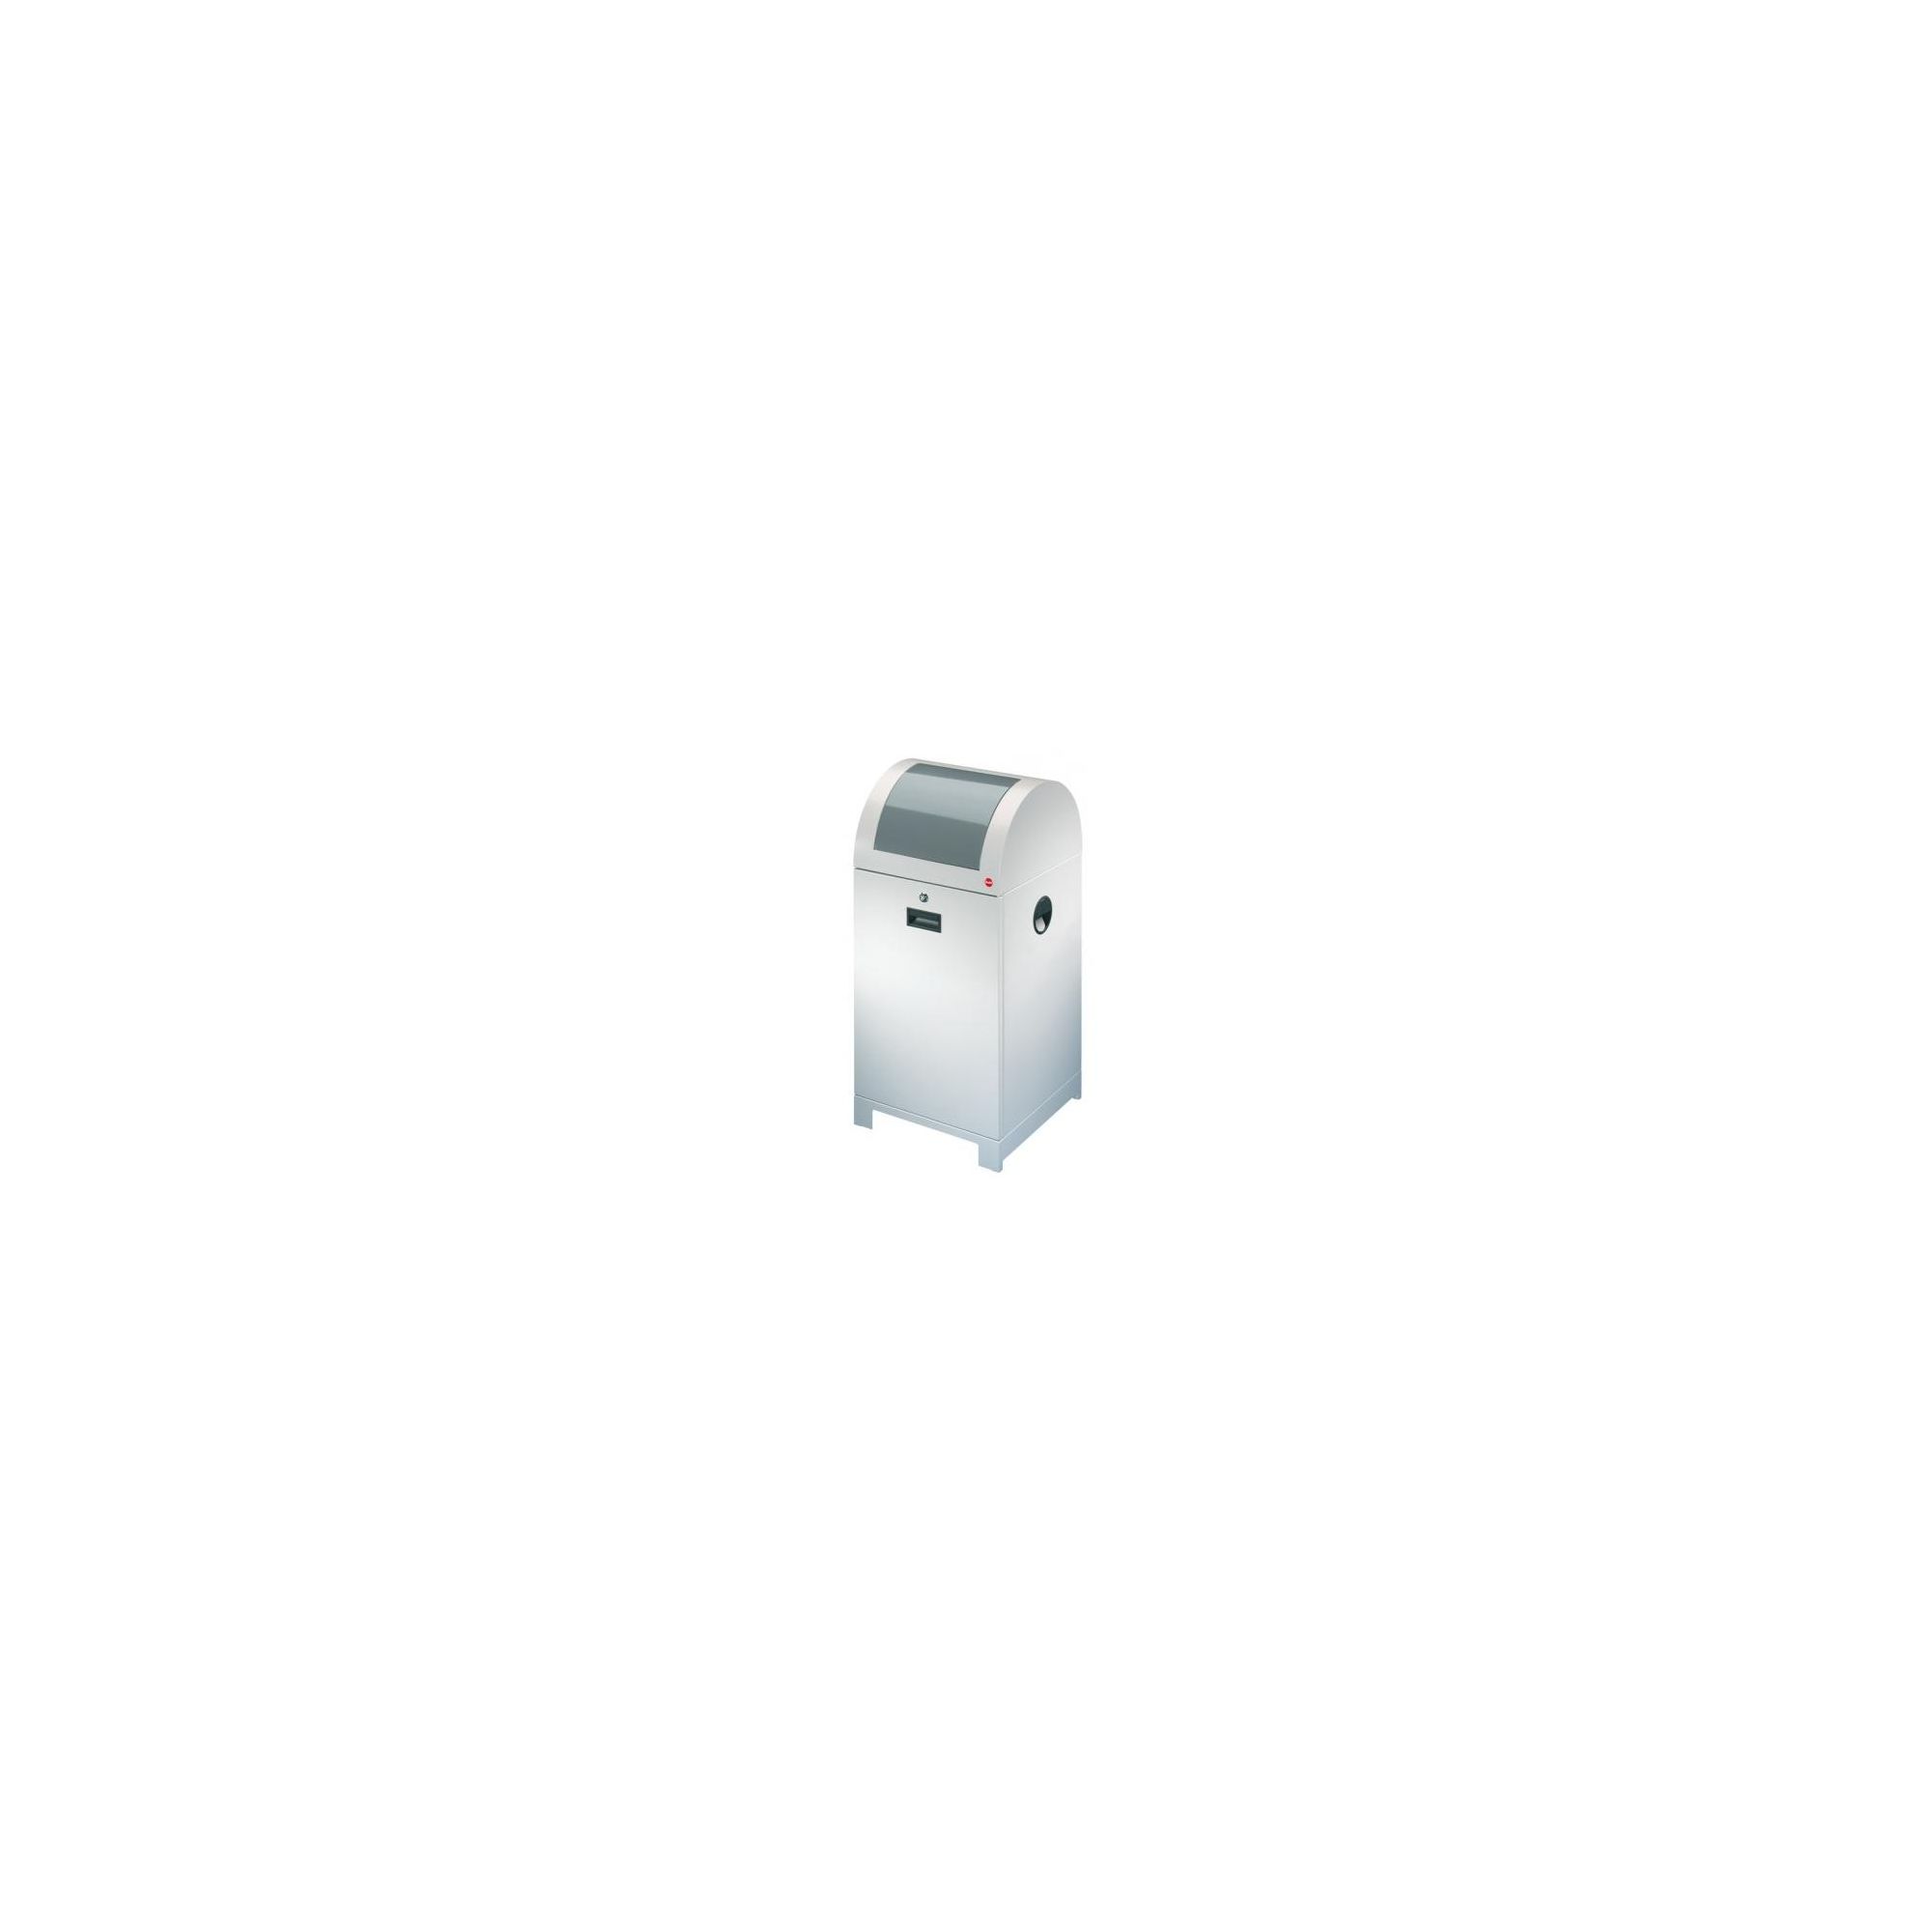 Hailo ProfiLine WSB 40 Recycling and Waste Bin with Galvanized Inner Bin at Tesco Direct